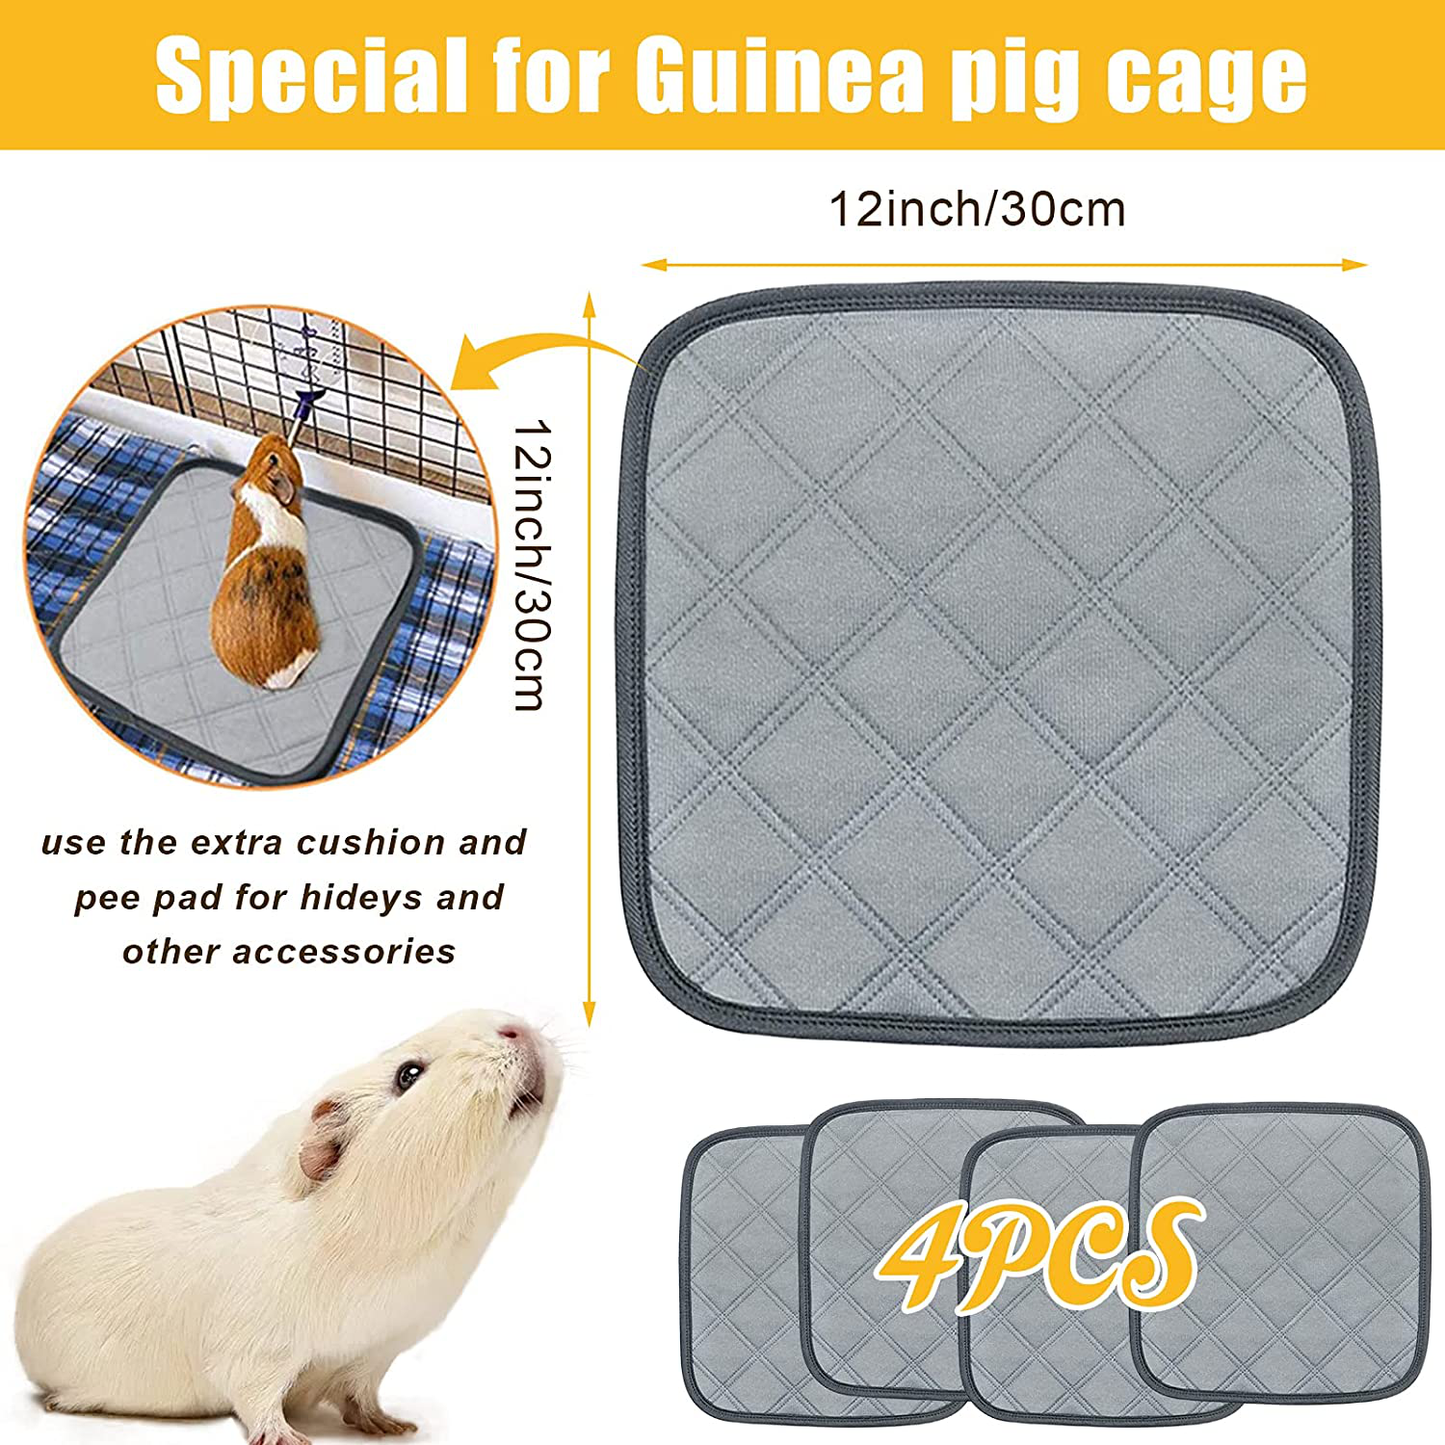 Luticessy Guinea Pig Cage Liners, Washable & Reusable Guinea Pig Pee Pads, Anti-Slip and Super Absorbent Guinea Pig Bedding, Waterproof Pet Training Pads for Small Animals Animals & Pet Supplies > Pet Supplies > Small Animal Supplies > Small Animal Bedding Luticessy   